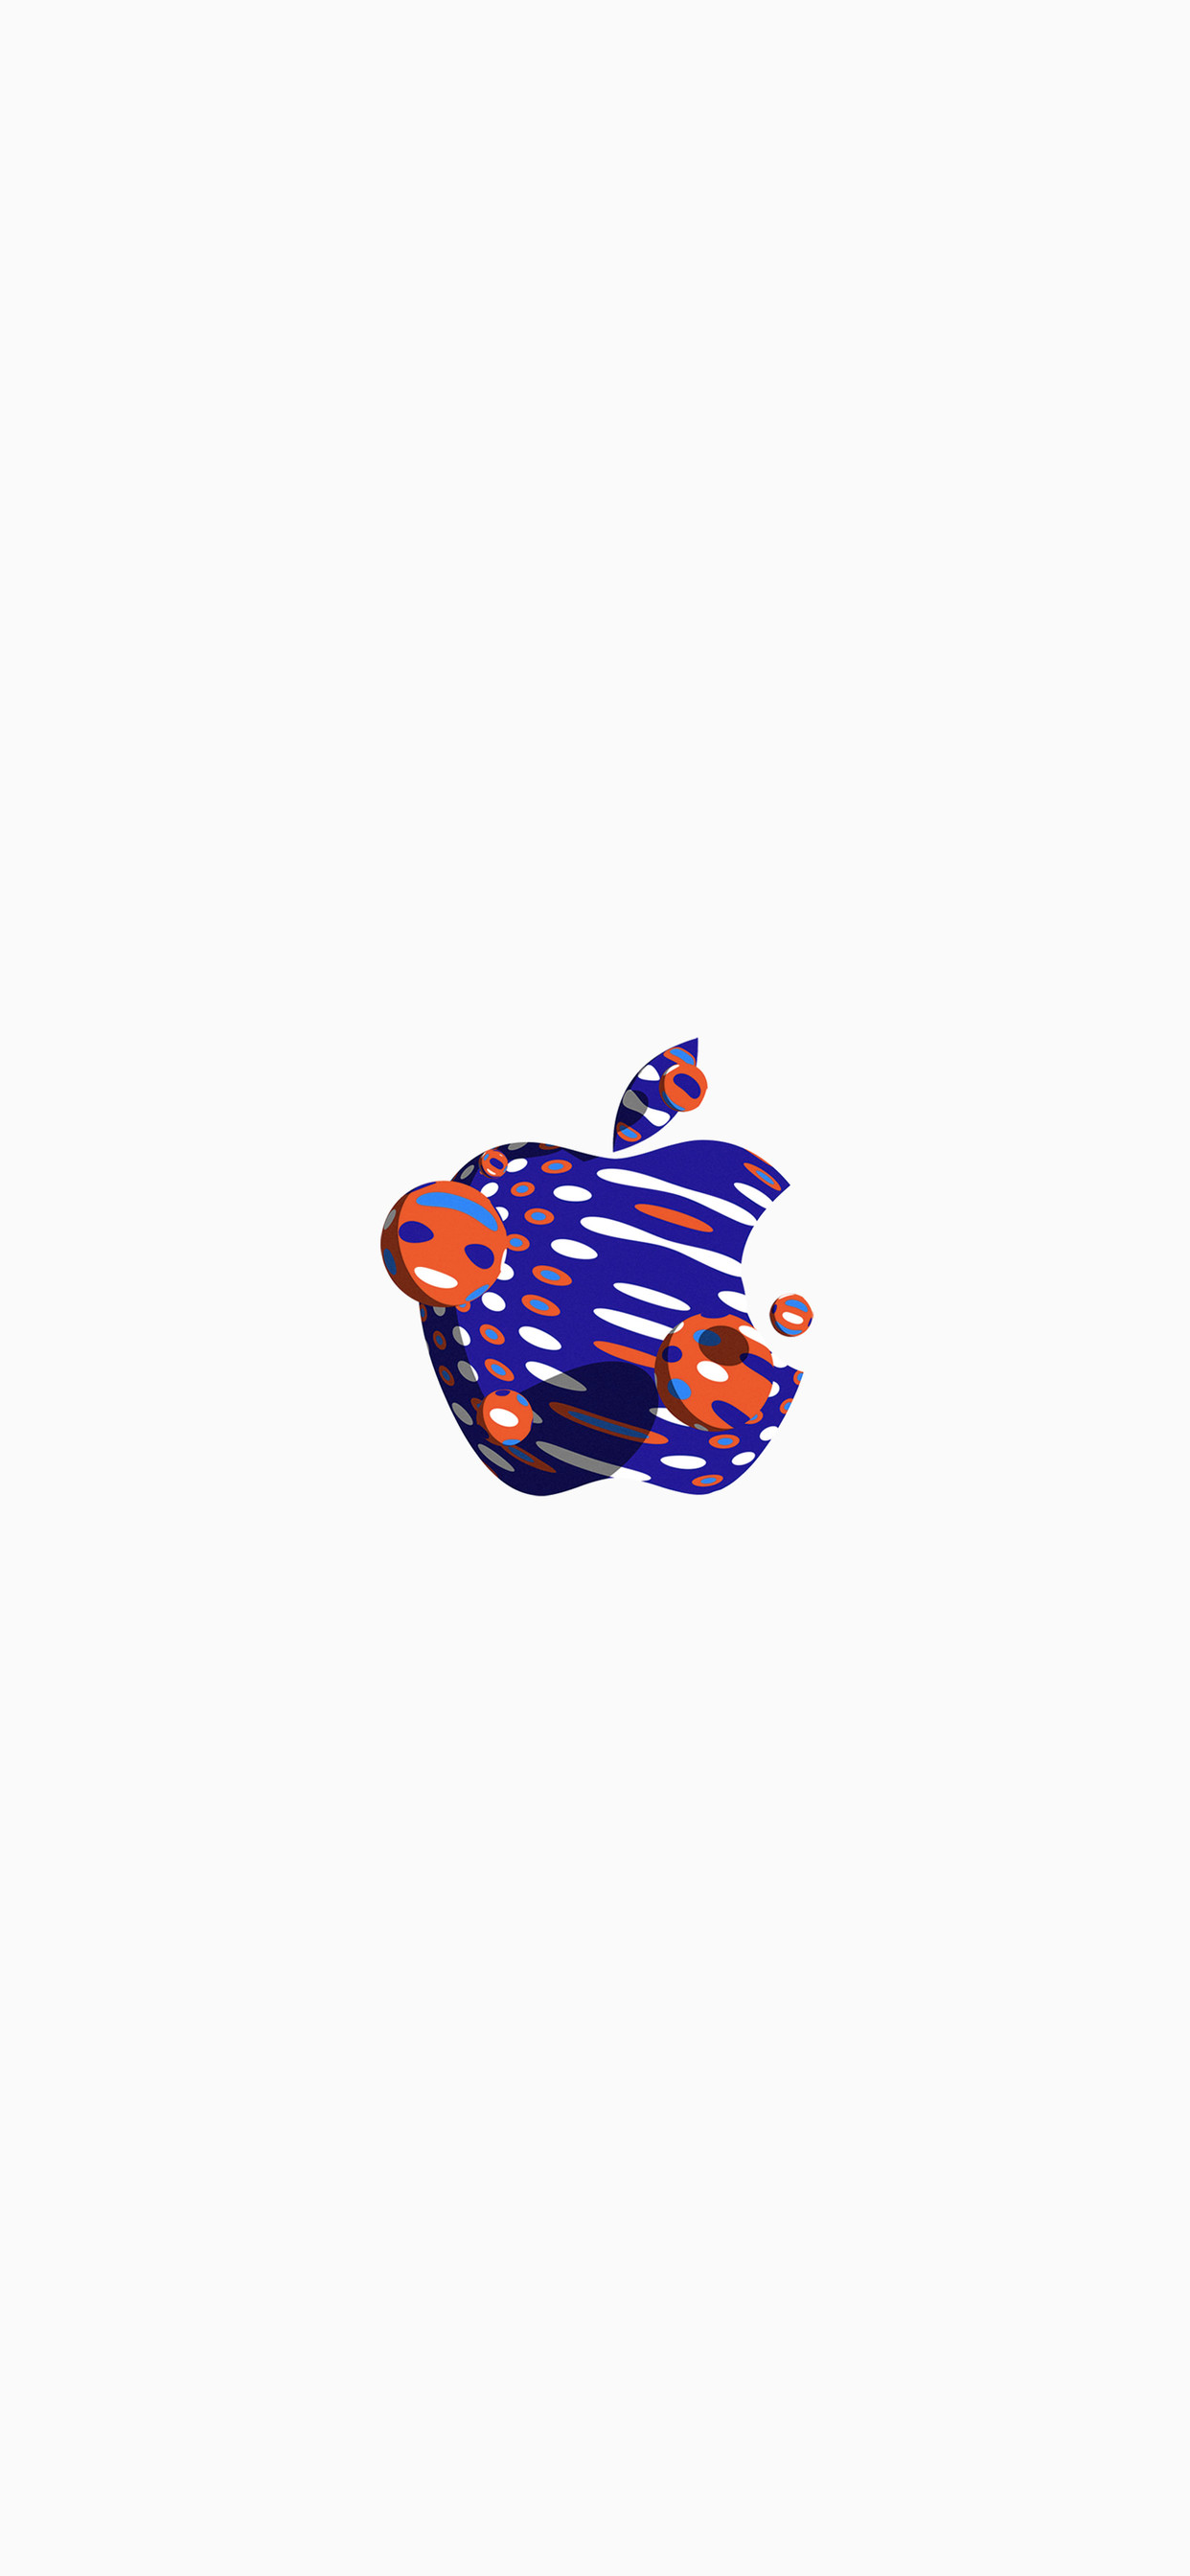 There's more in the making: 33 Apple logo wallpapers